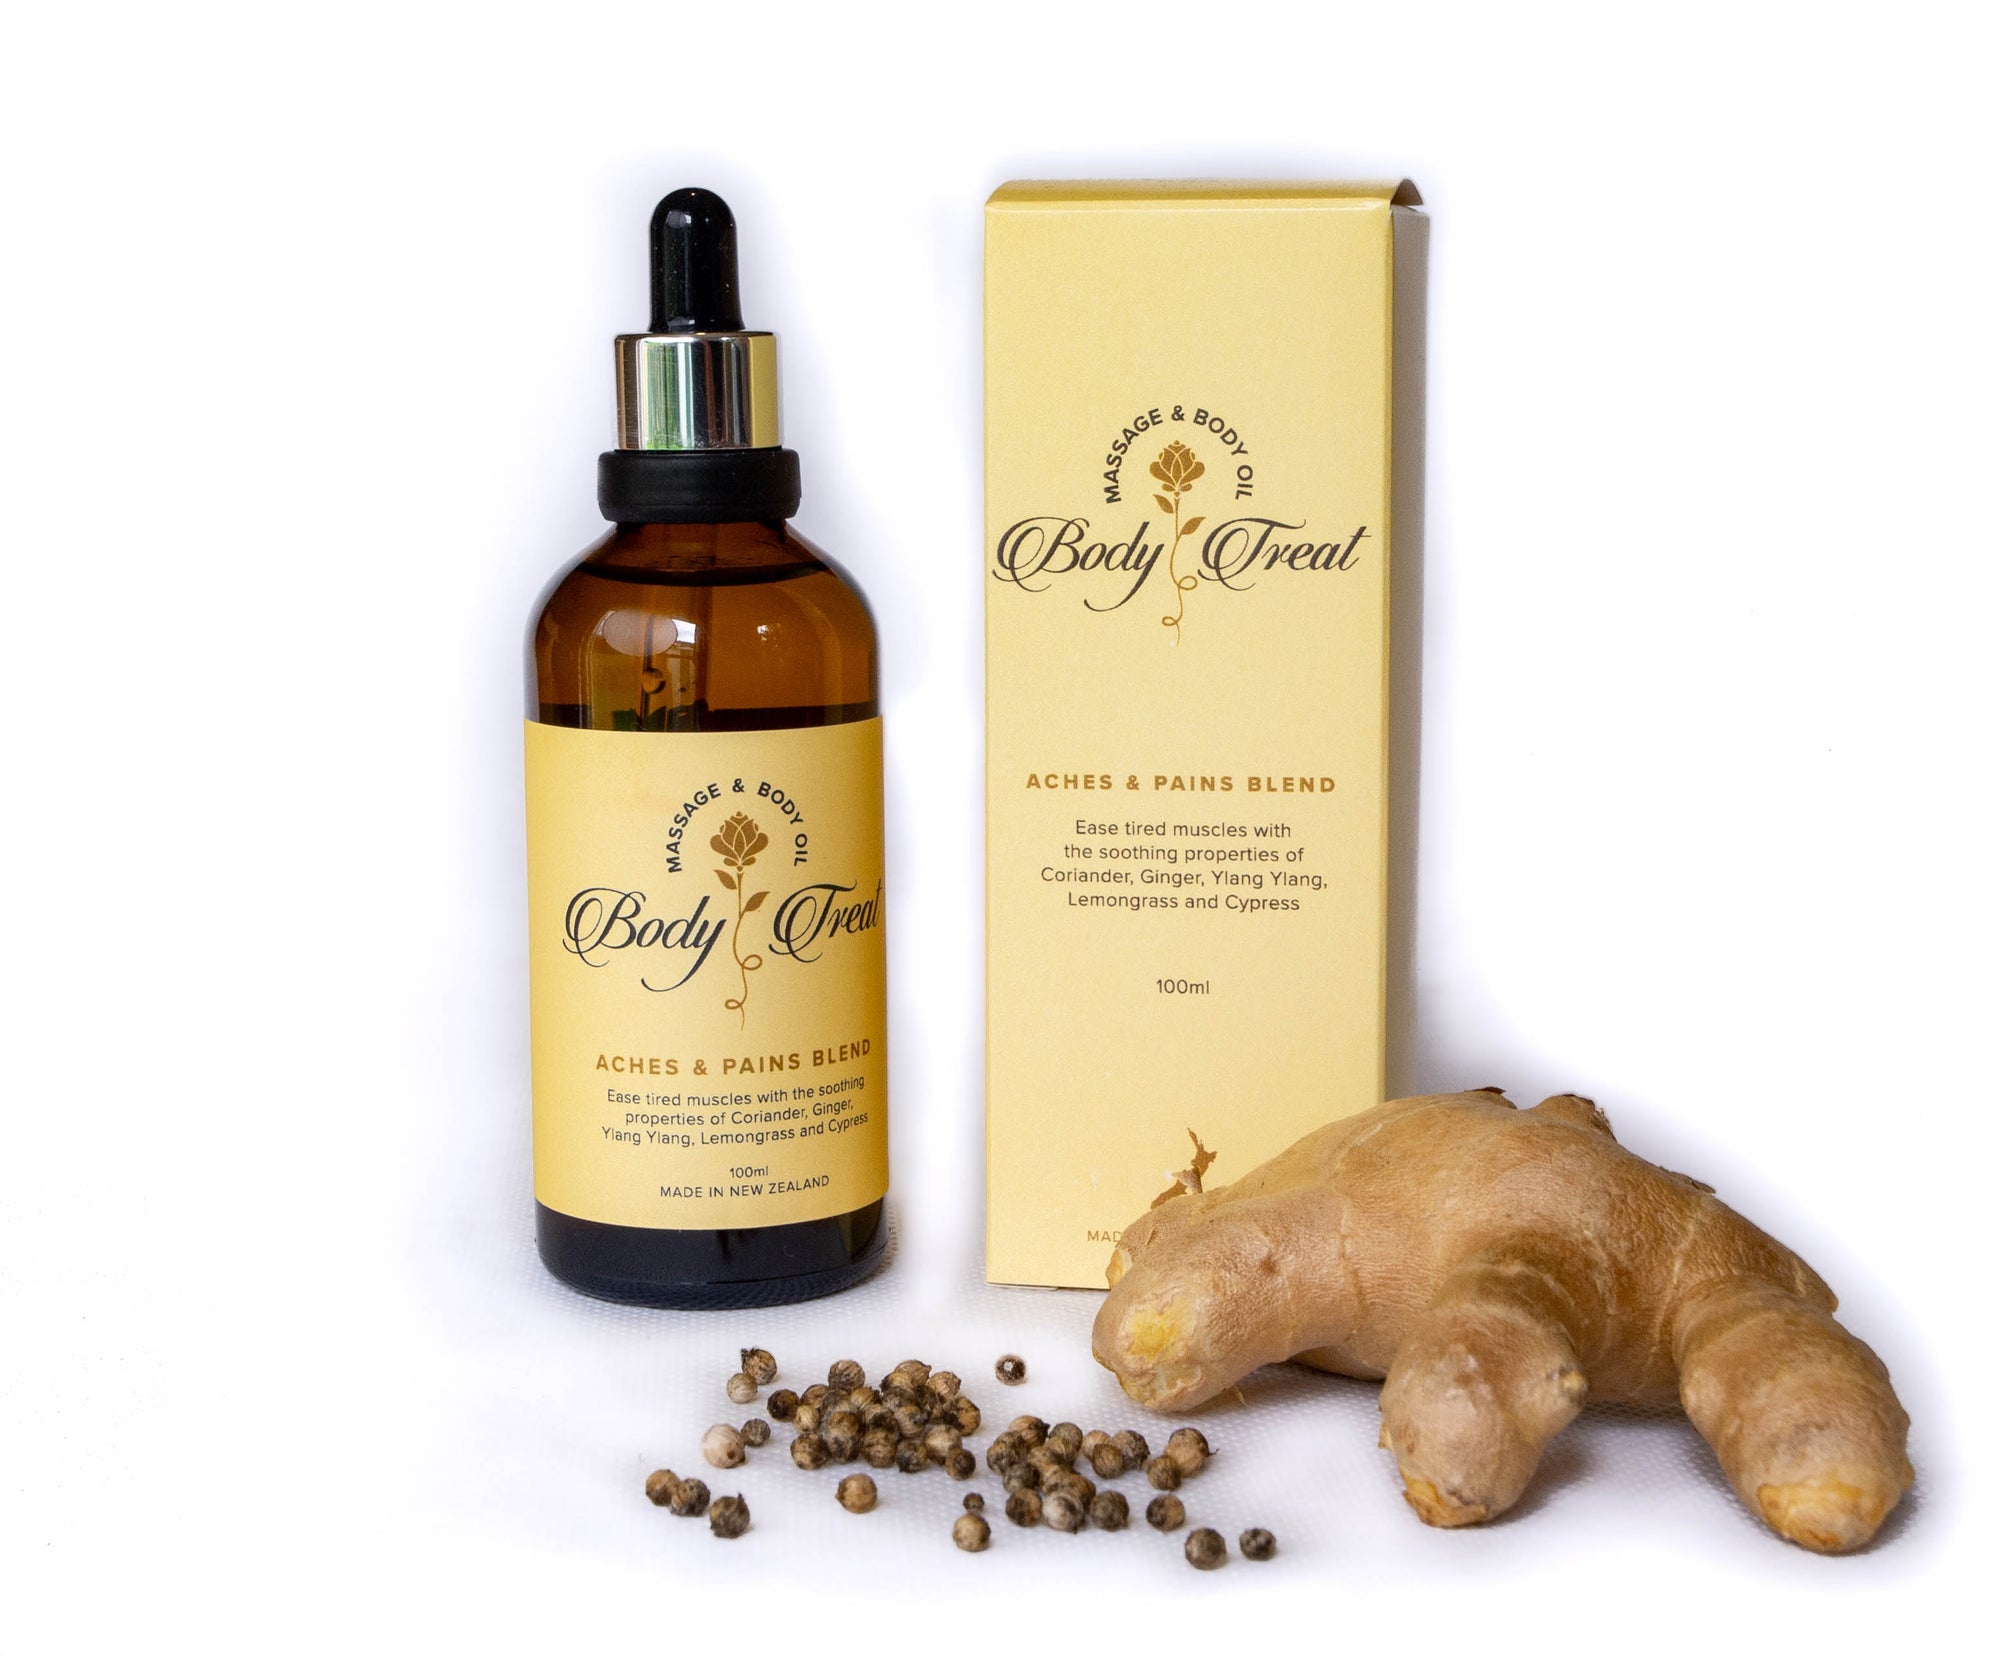 Aches & Pains Blend Body Oil